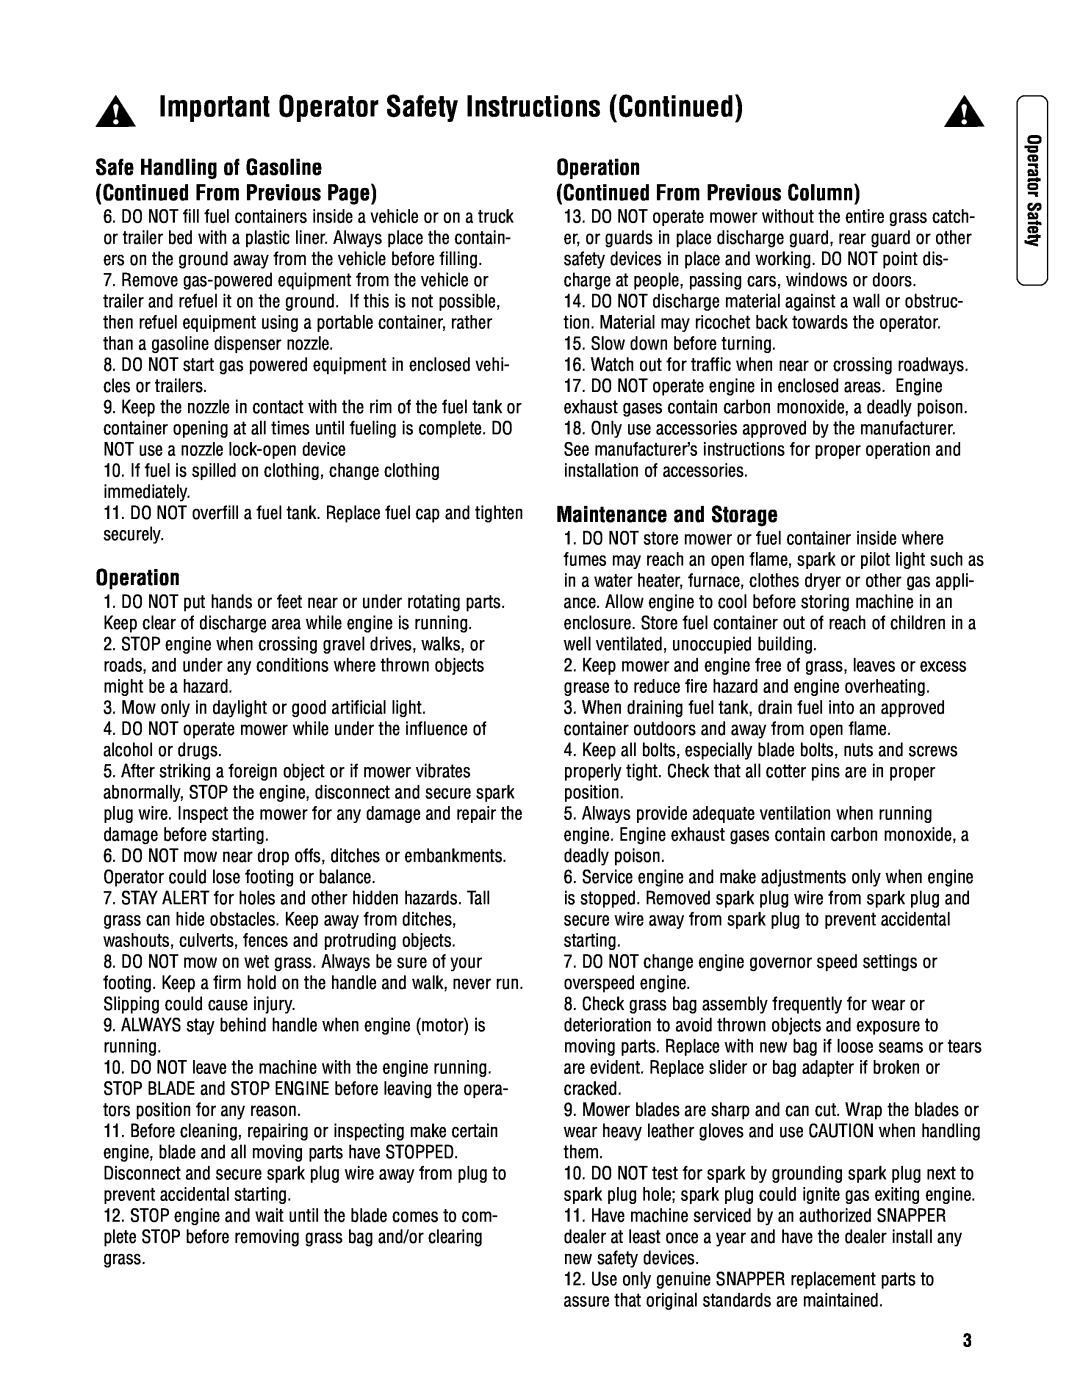 Snapper 2167519B Important Operator Safety Instructions Continued, Safe Handling of Gasoline Continued From Previous Page 